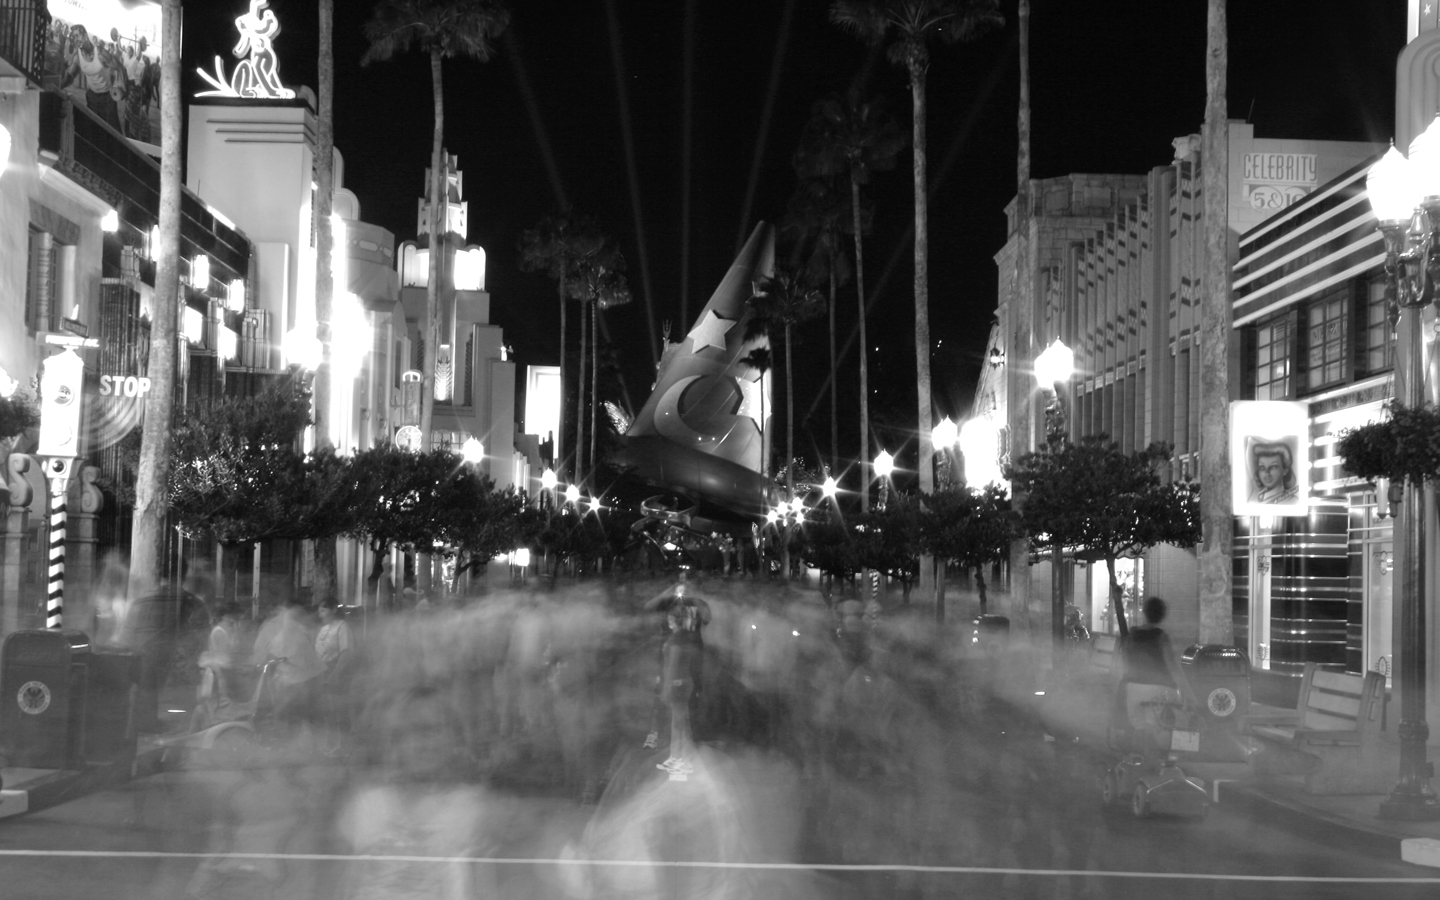 Hollywood Boulevard by AreteEirene on